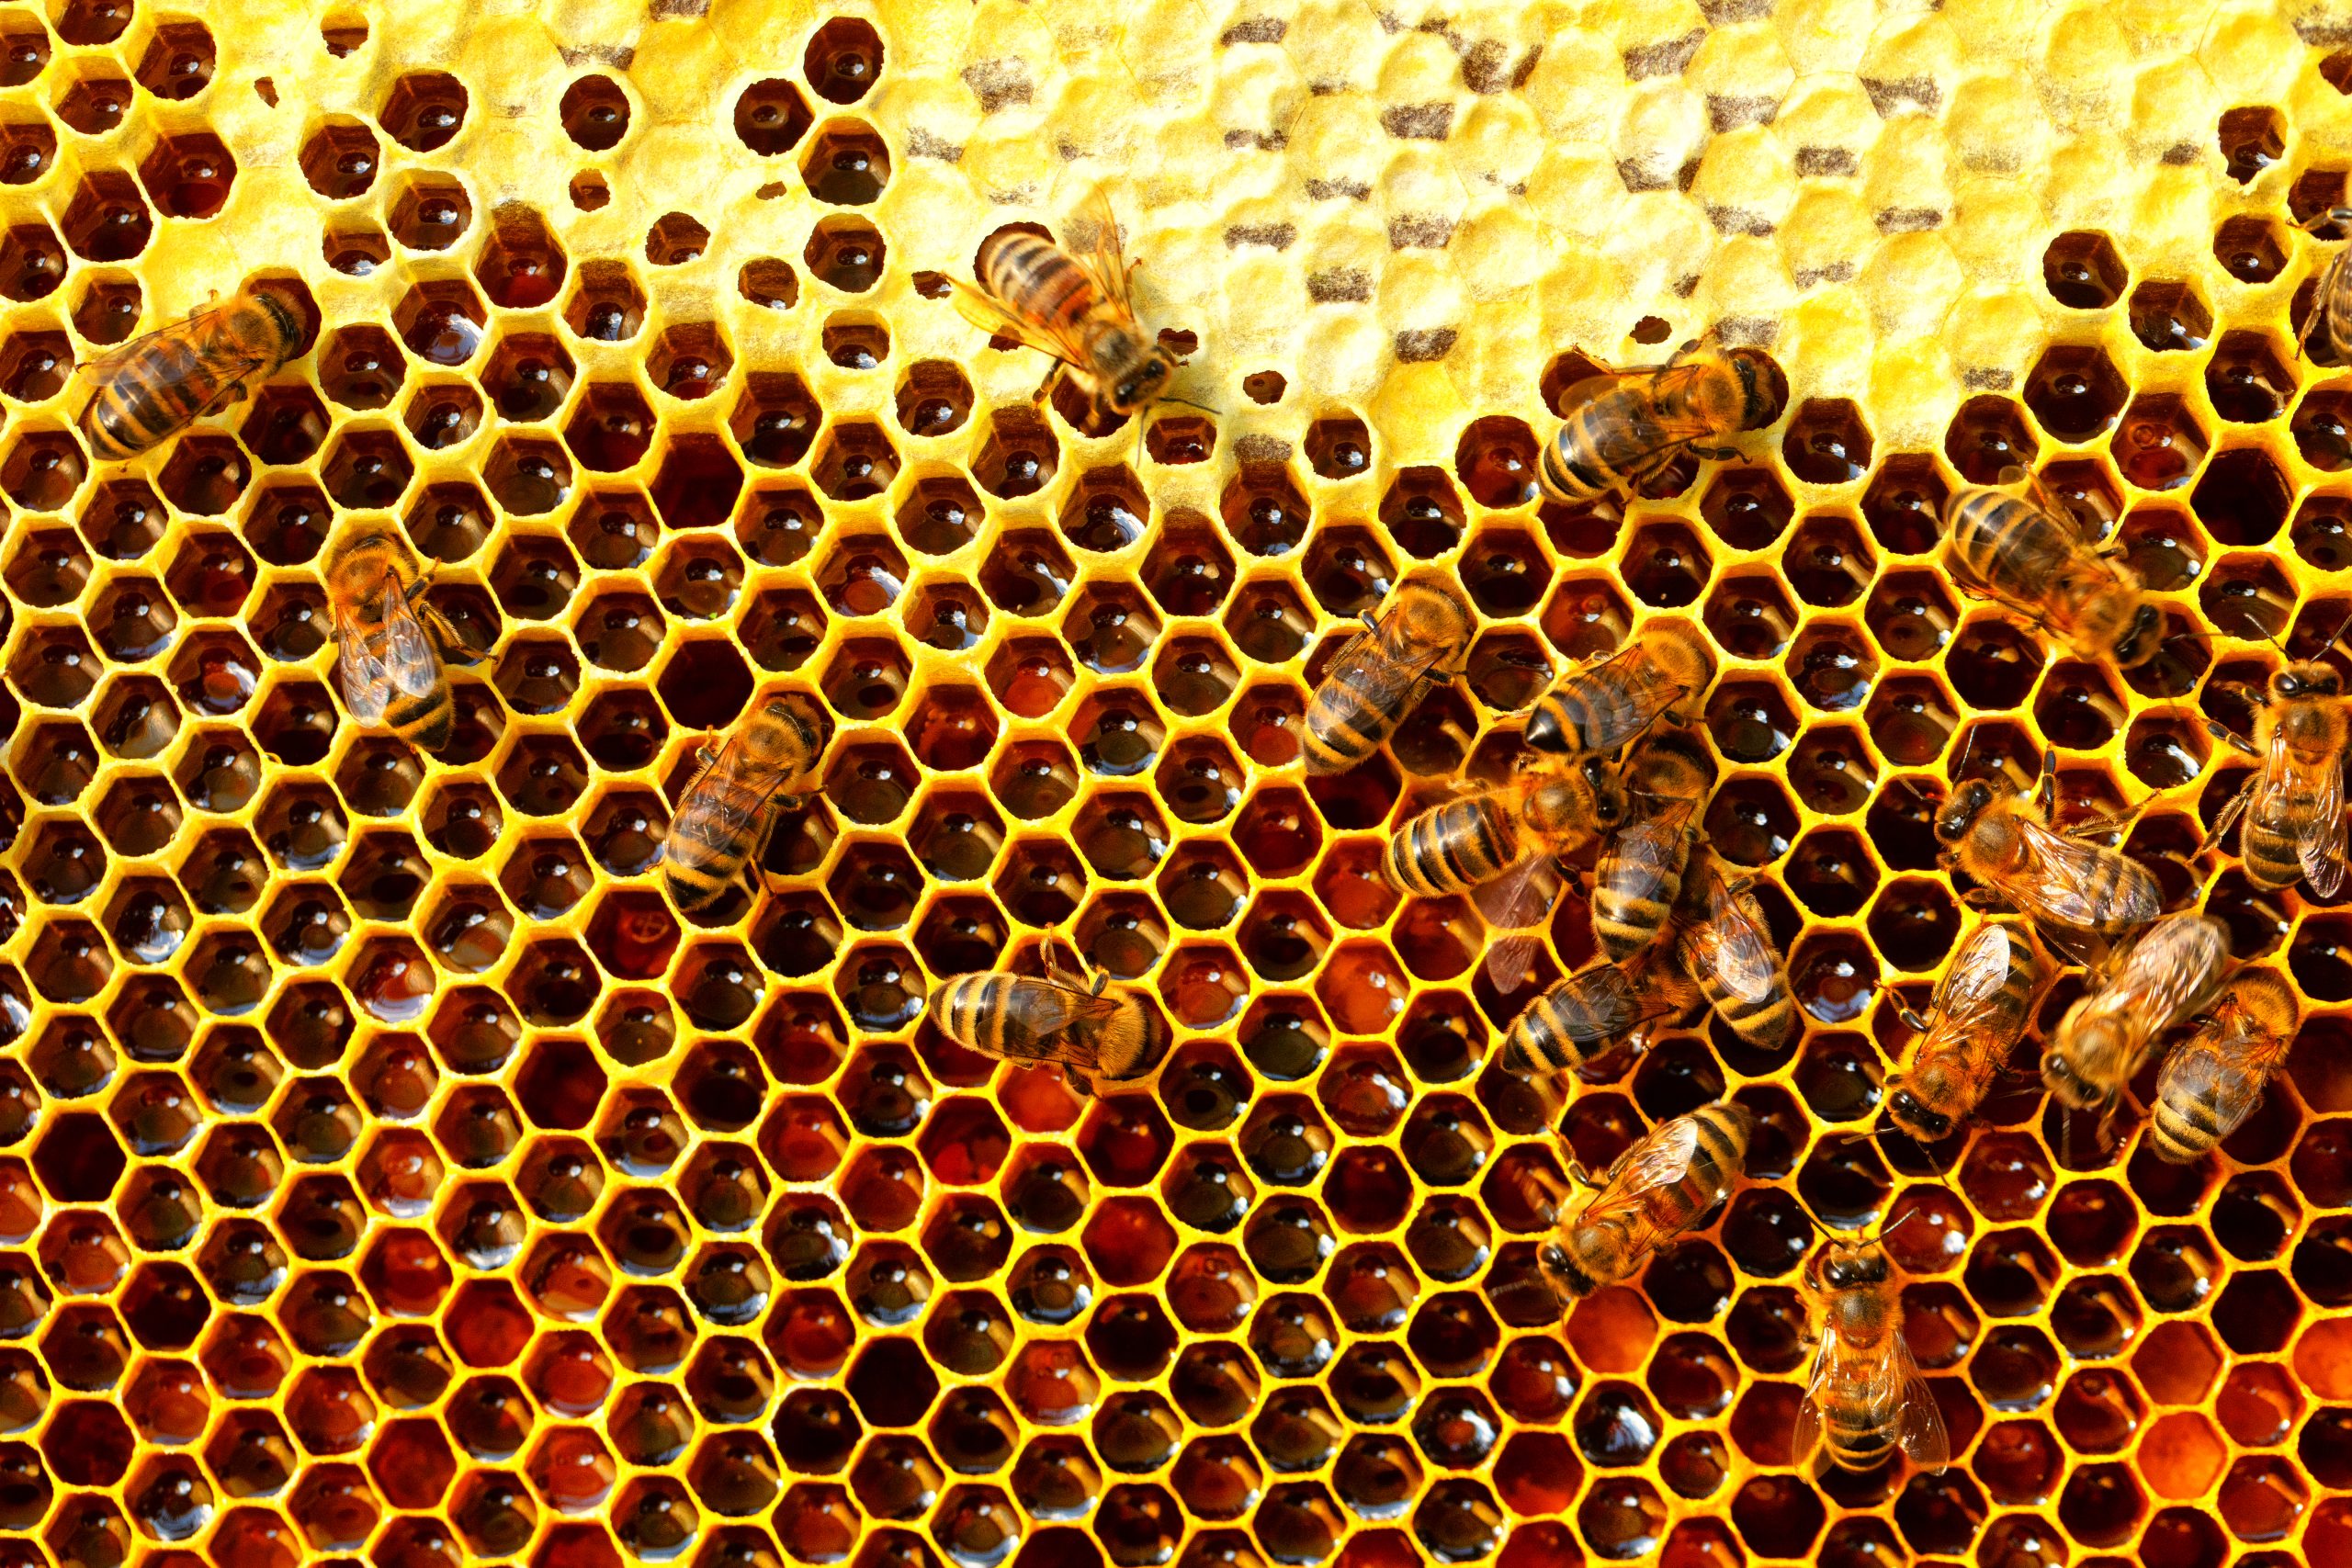 Fresh honey in the hive. Bees work. Construction of honeycombs. Abstract natural background.